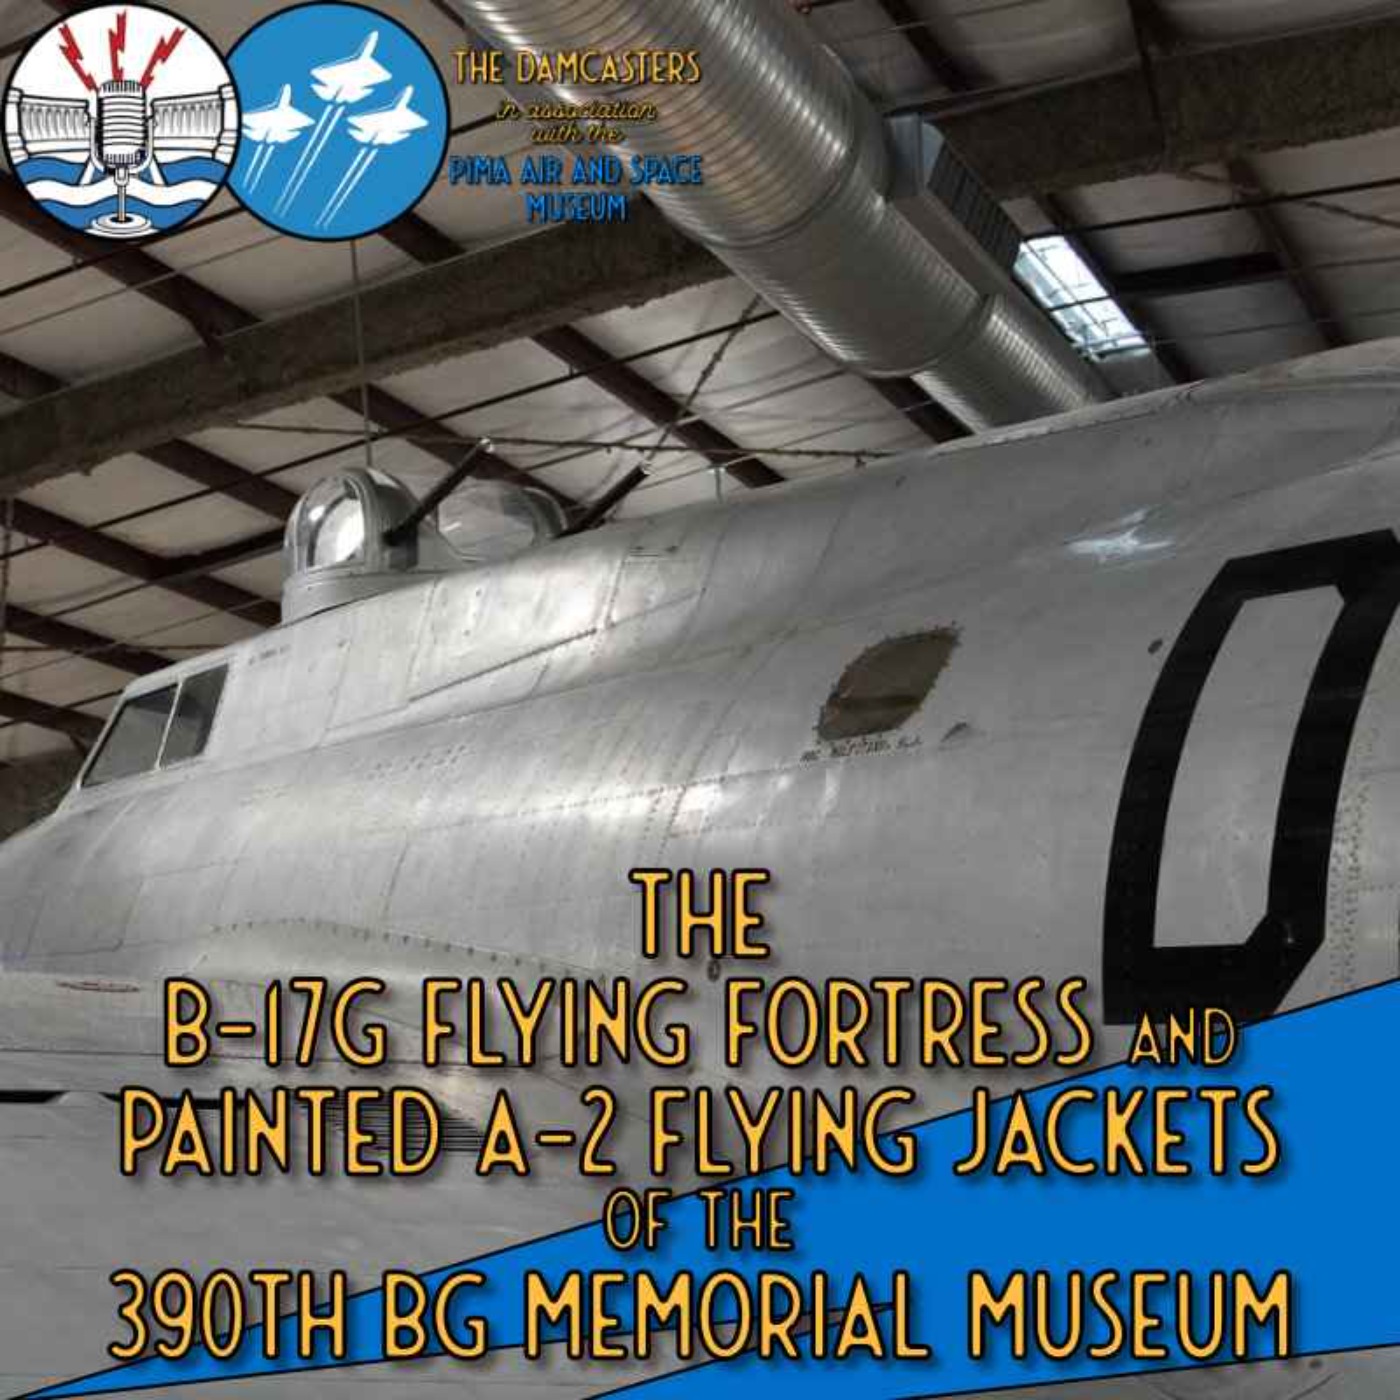 cover art for The B-17G Flying Fortress and Painted A-2 Flying Jackets of the 390th BG Memorial Museum